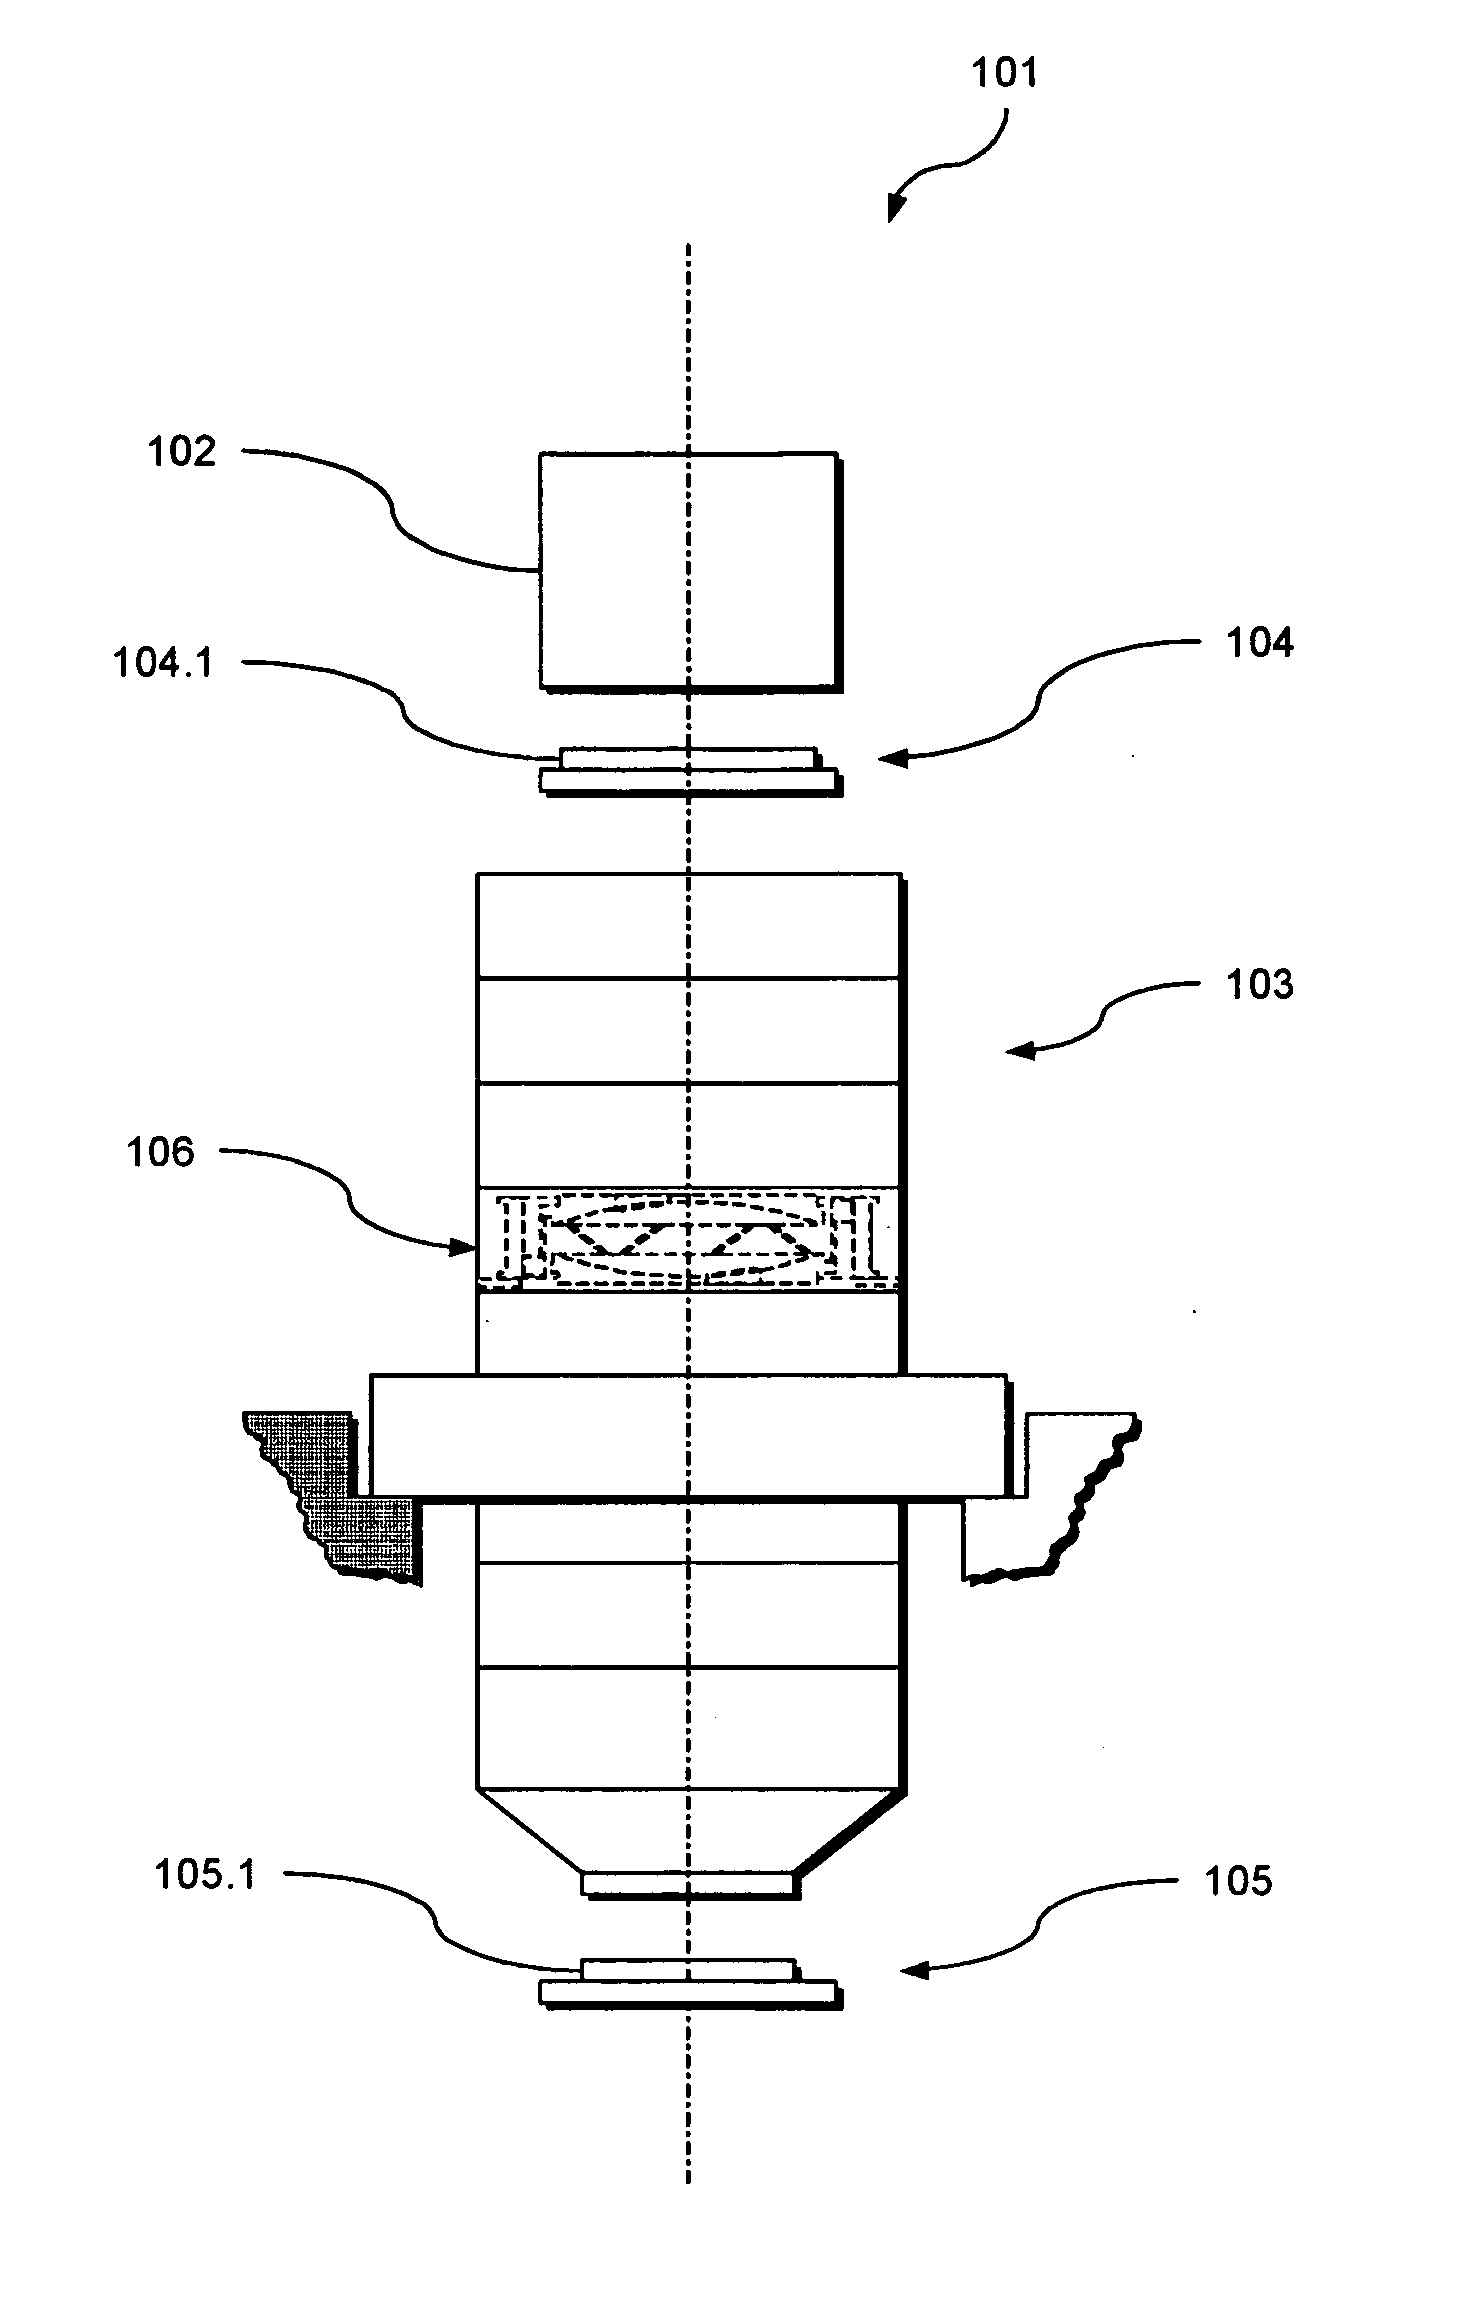 Reflecting optical element with eccentric optical passageway